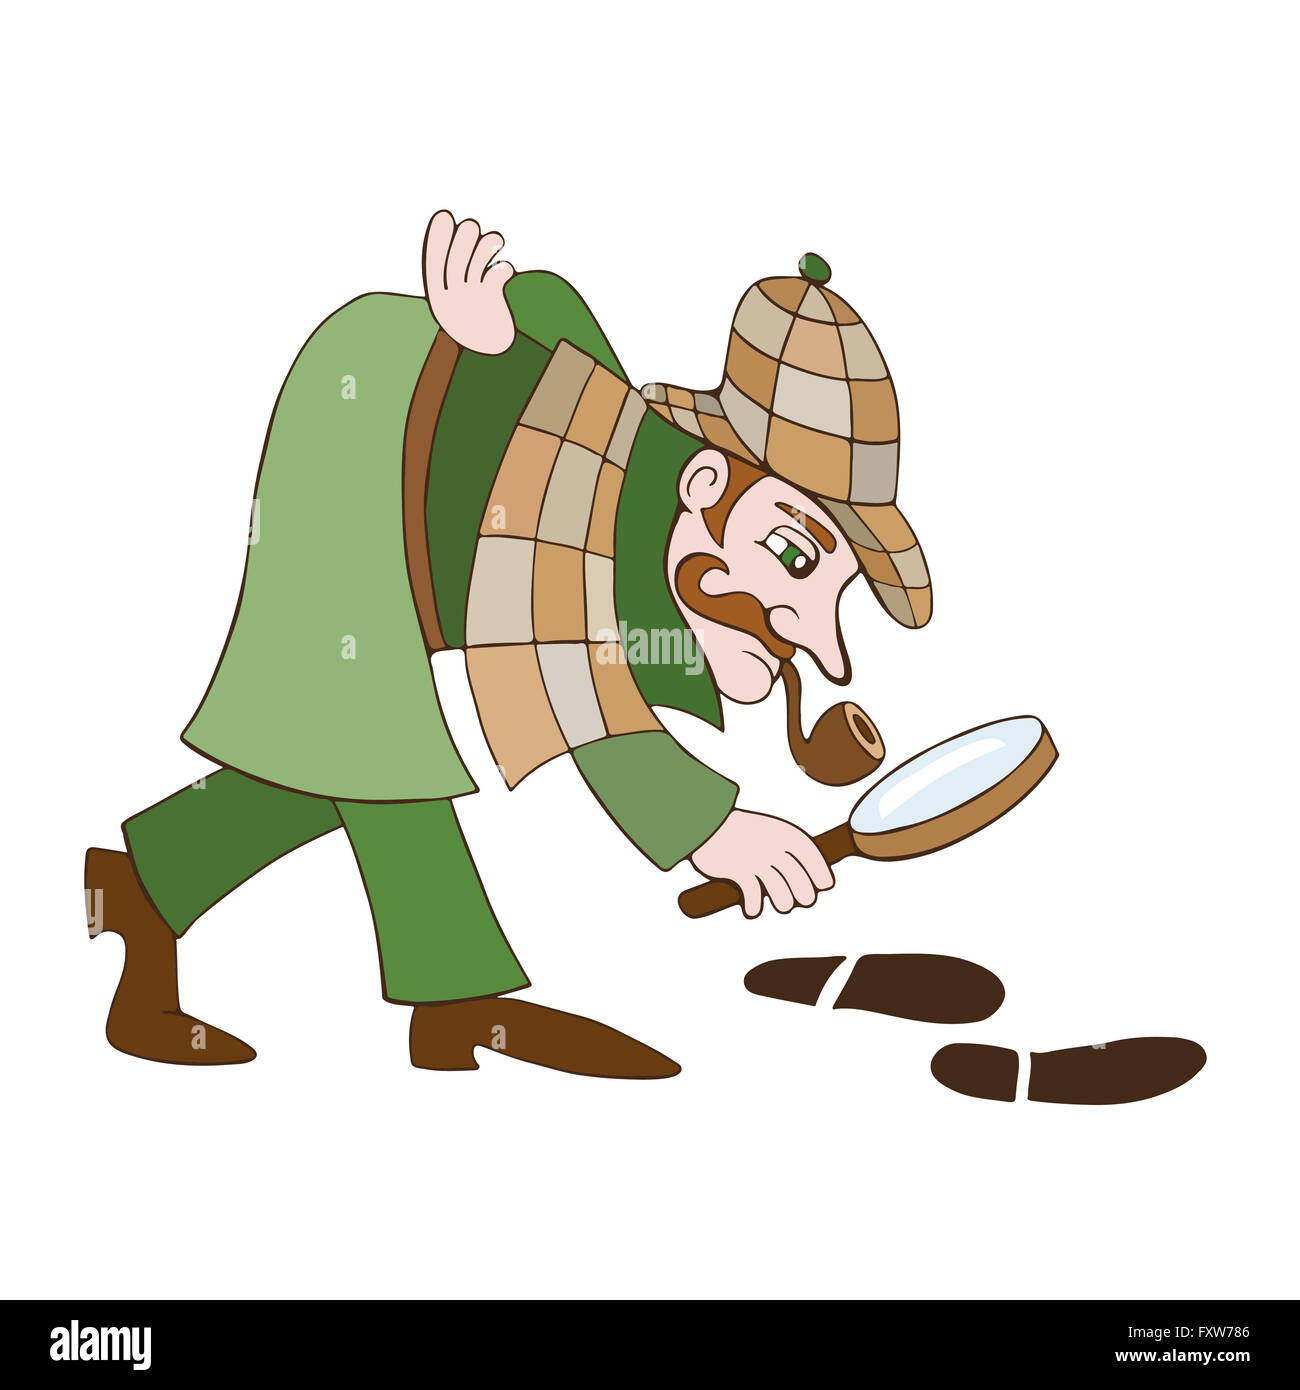 detective-cartoon-illustration-of-a-detective-on-a-white-background